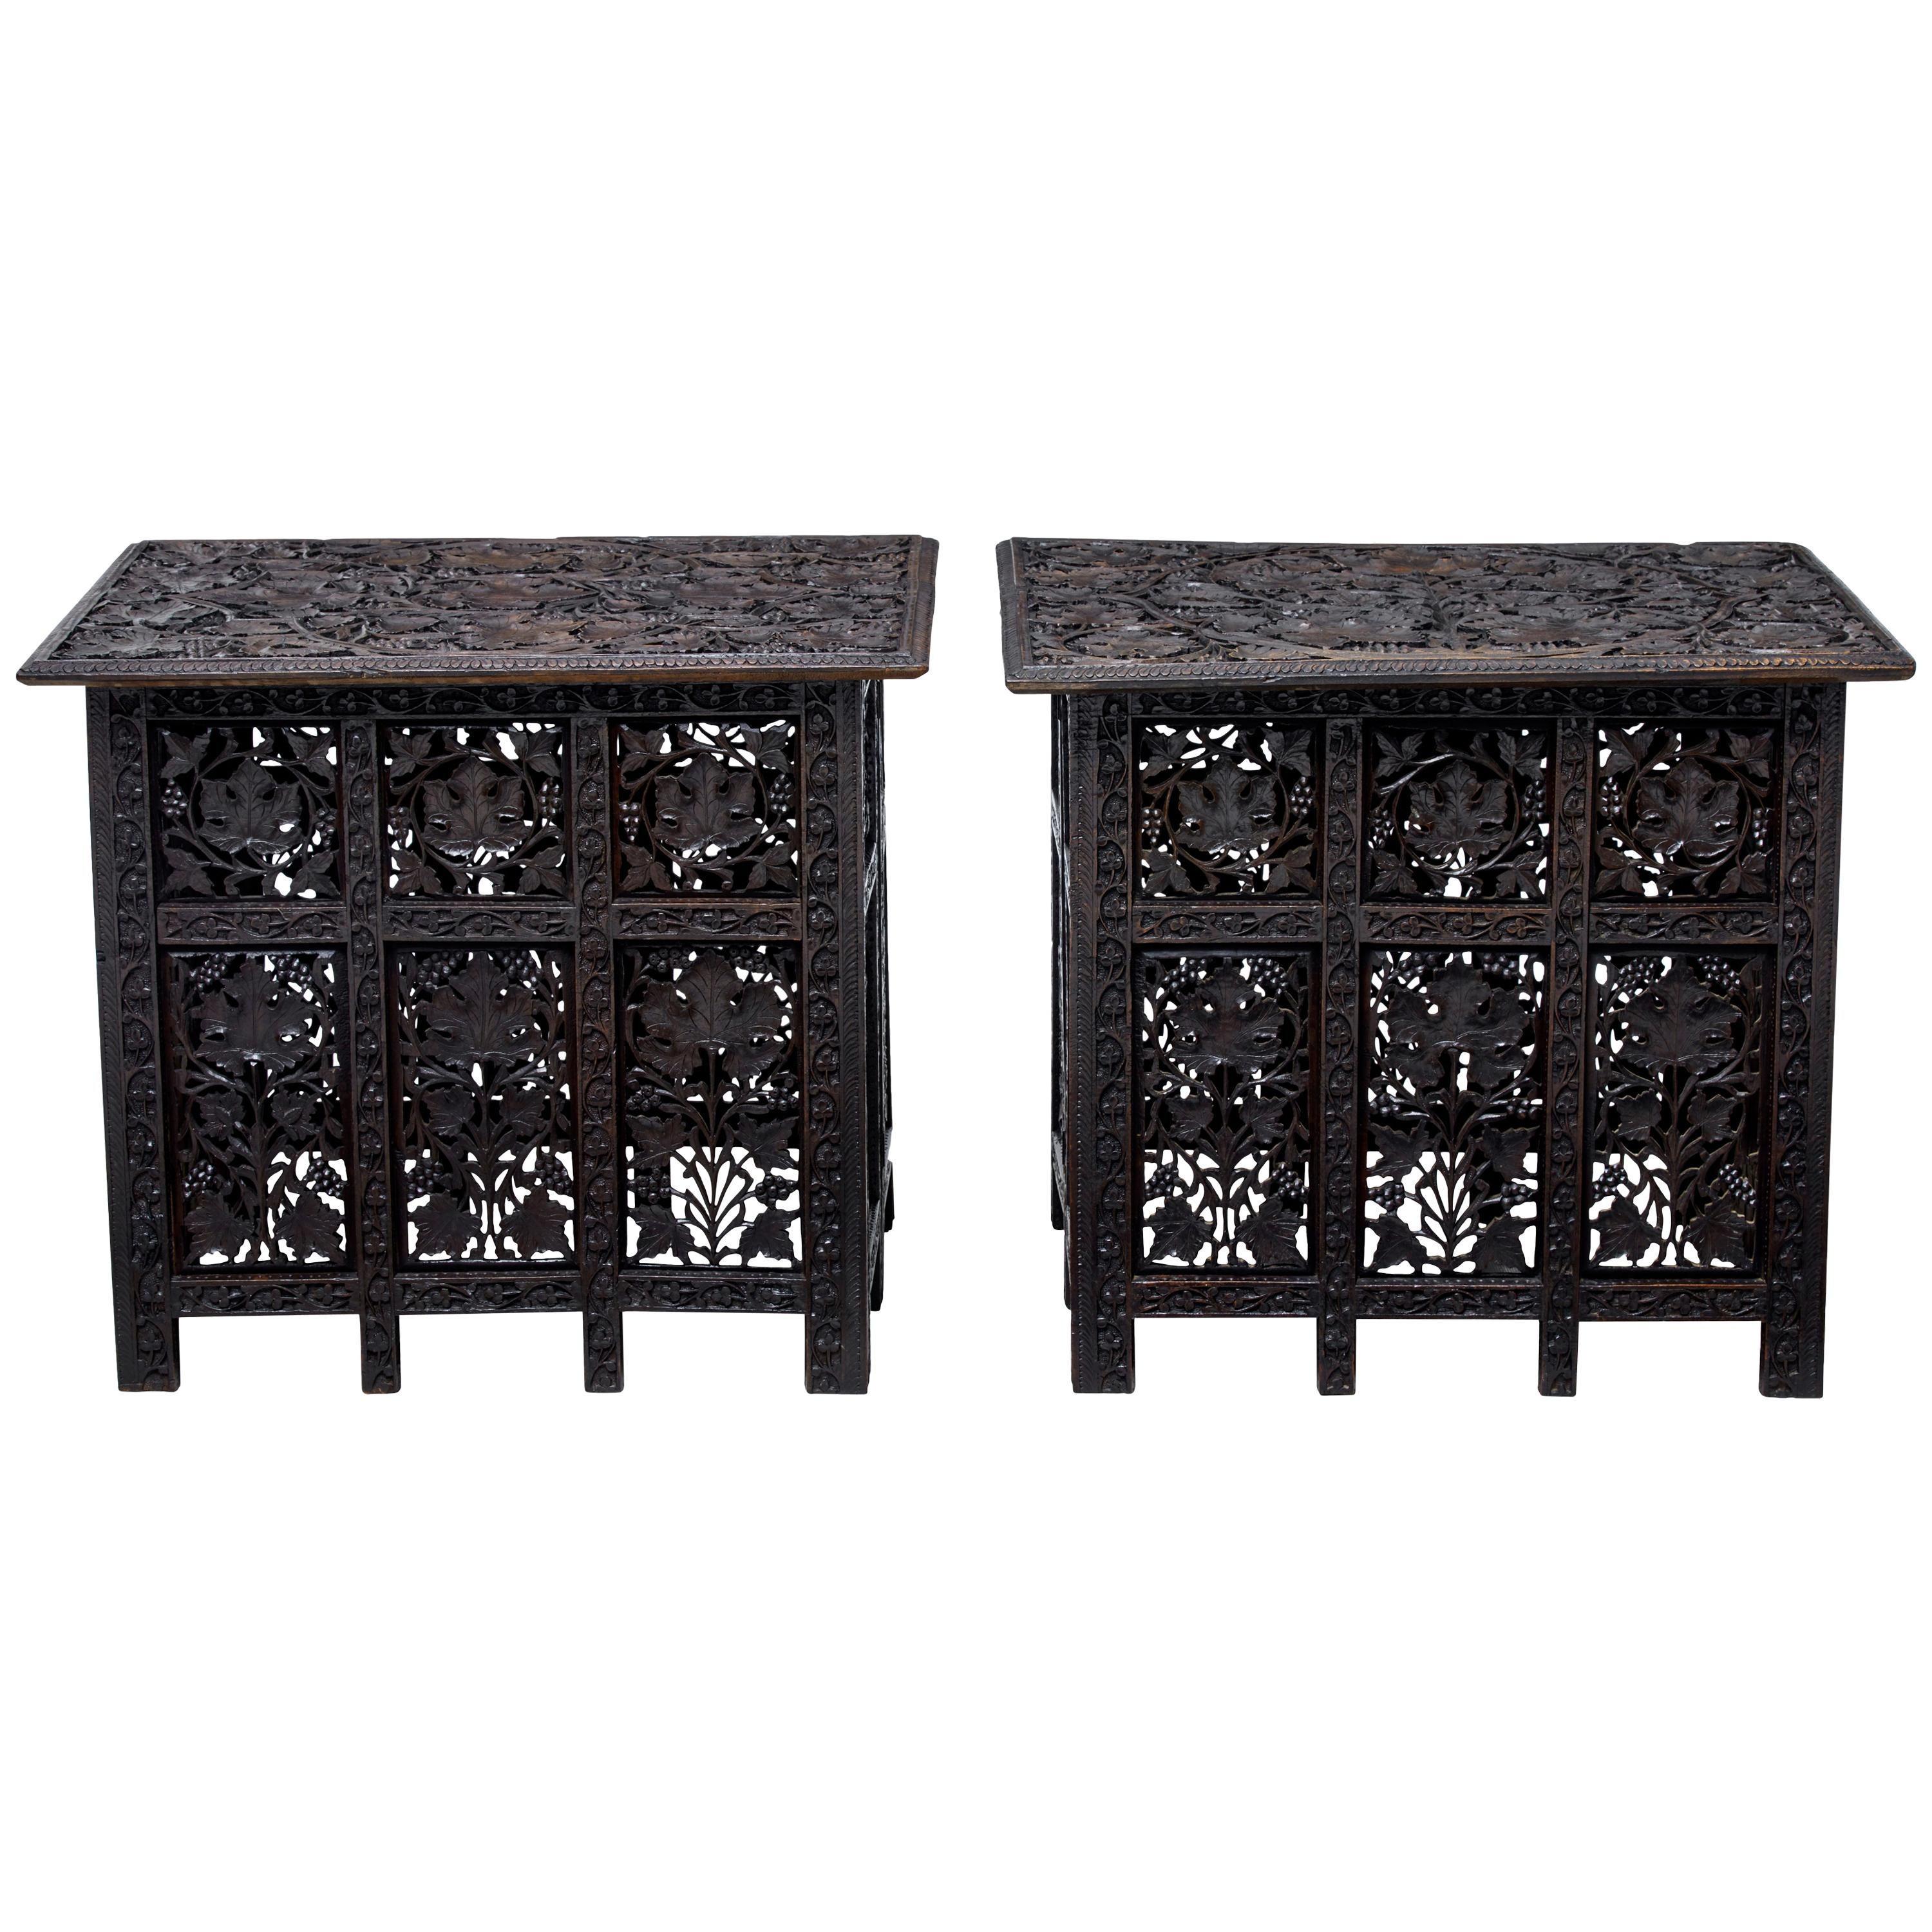 Pair of Late 19th Century Anglo-Indian Carved Tables